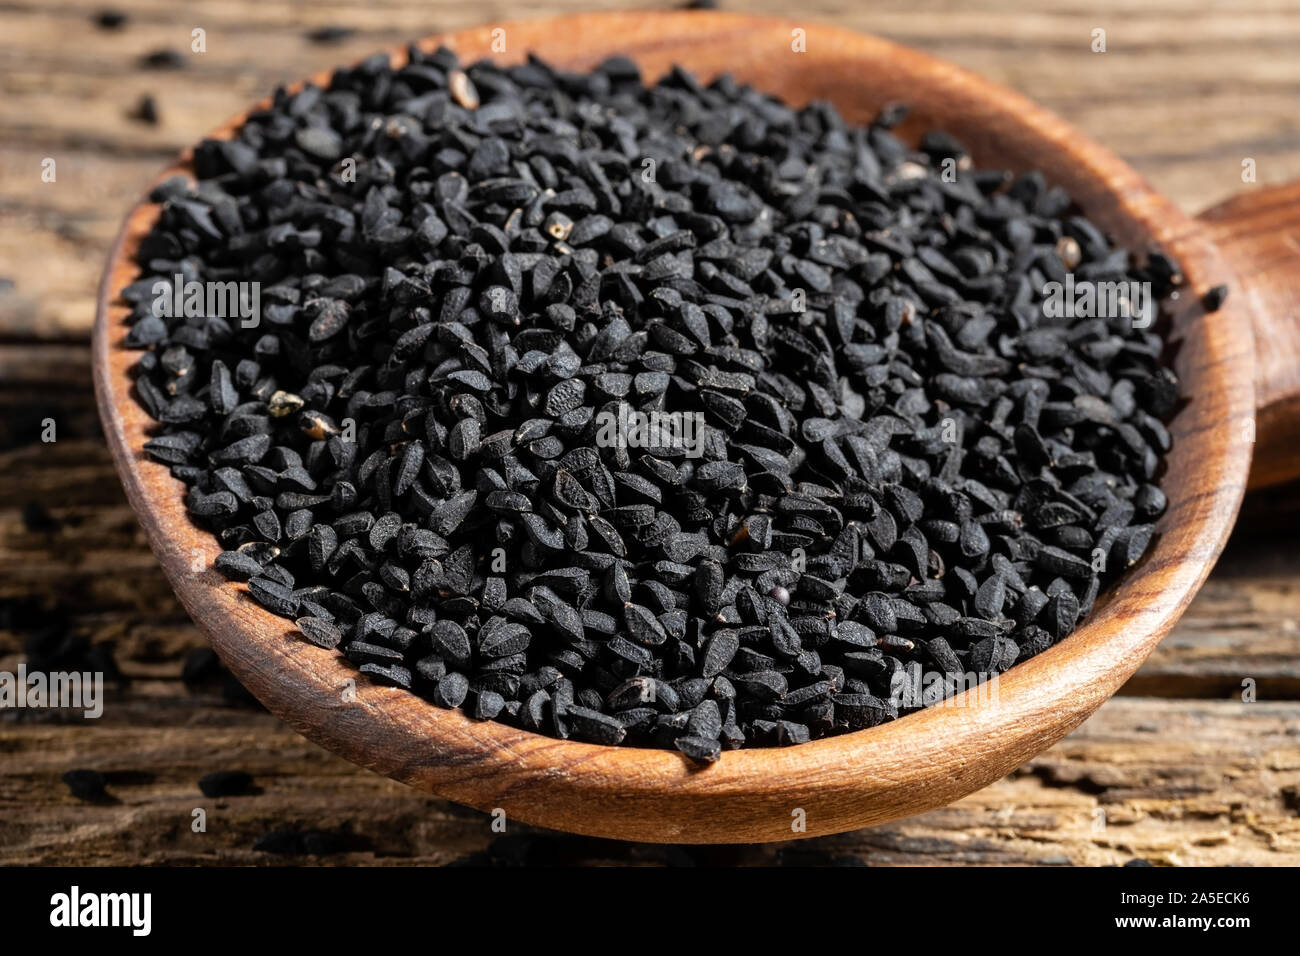 Black cumin seeds on a wooden spoon Stock Photo